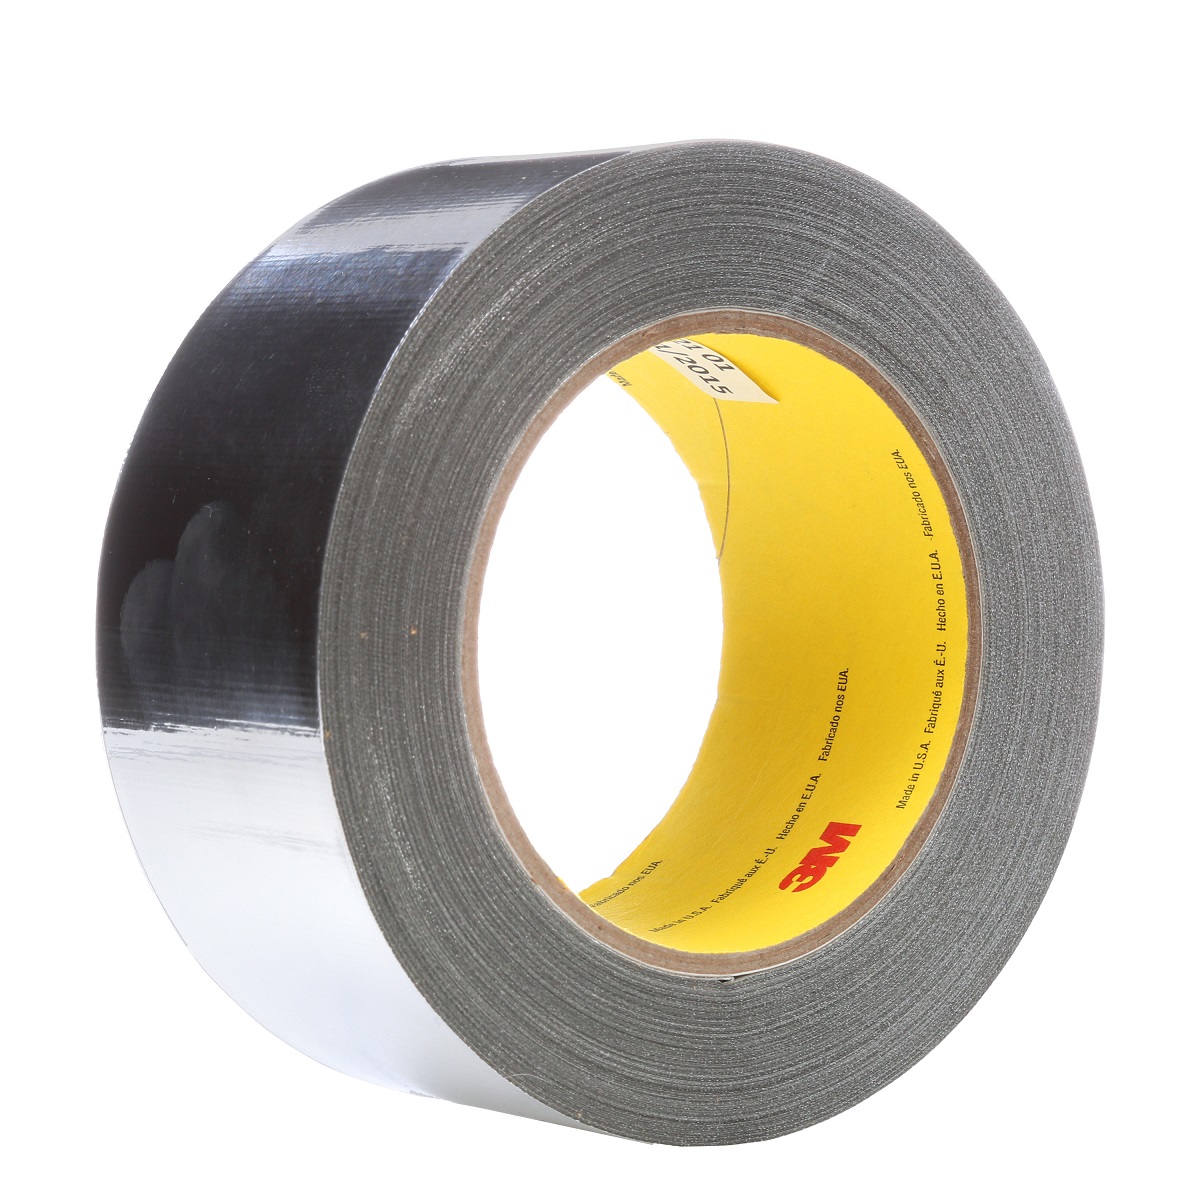 3M - 201+ 2 x 60yd General Use 201+ Masking Tape - 2 in. (W) x